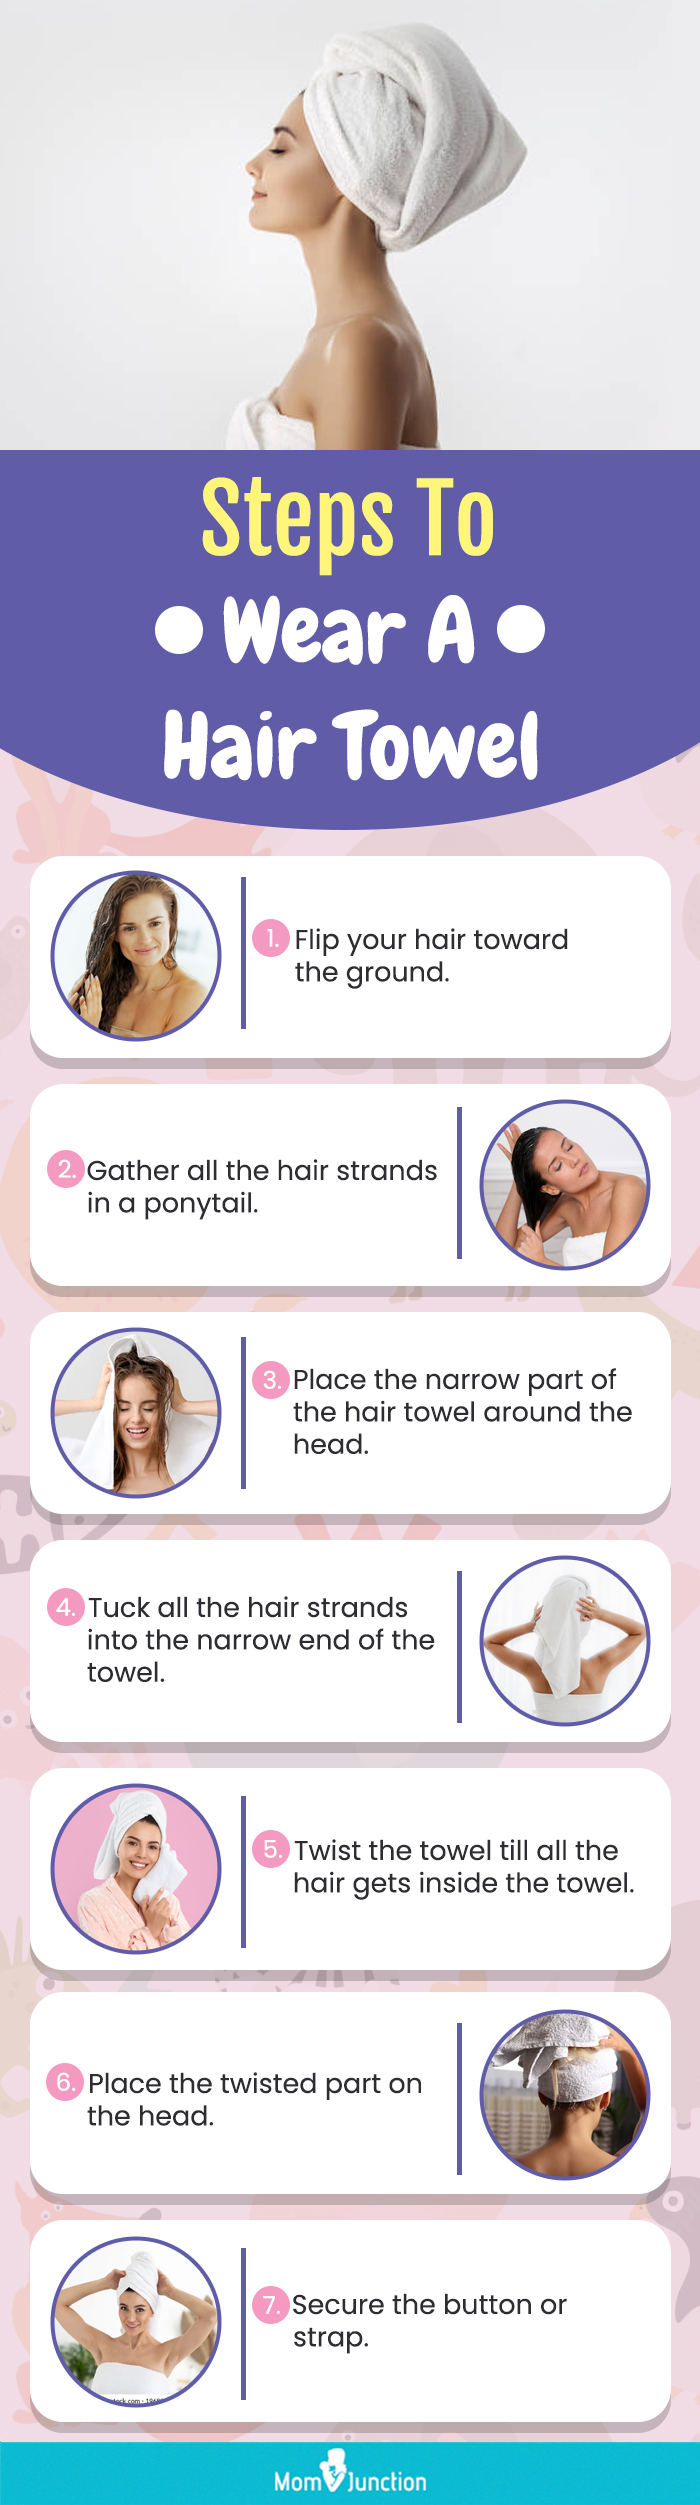 Steps To Wear A Hair Towel(infographic)